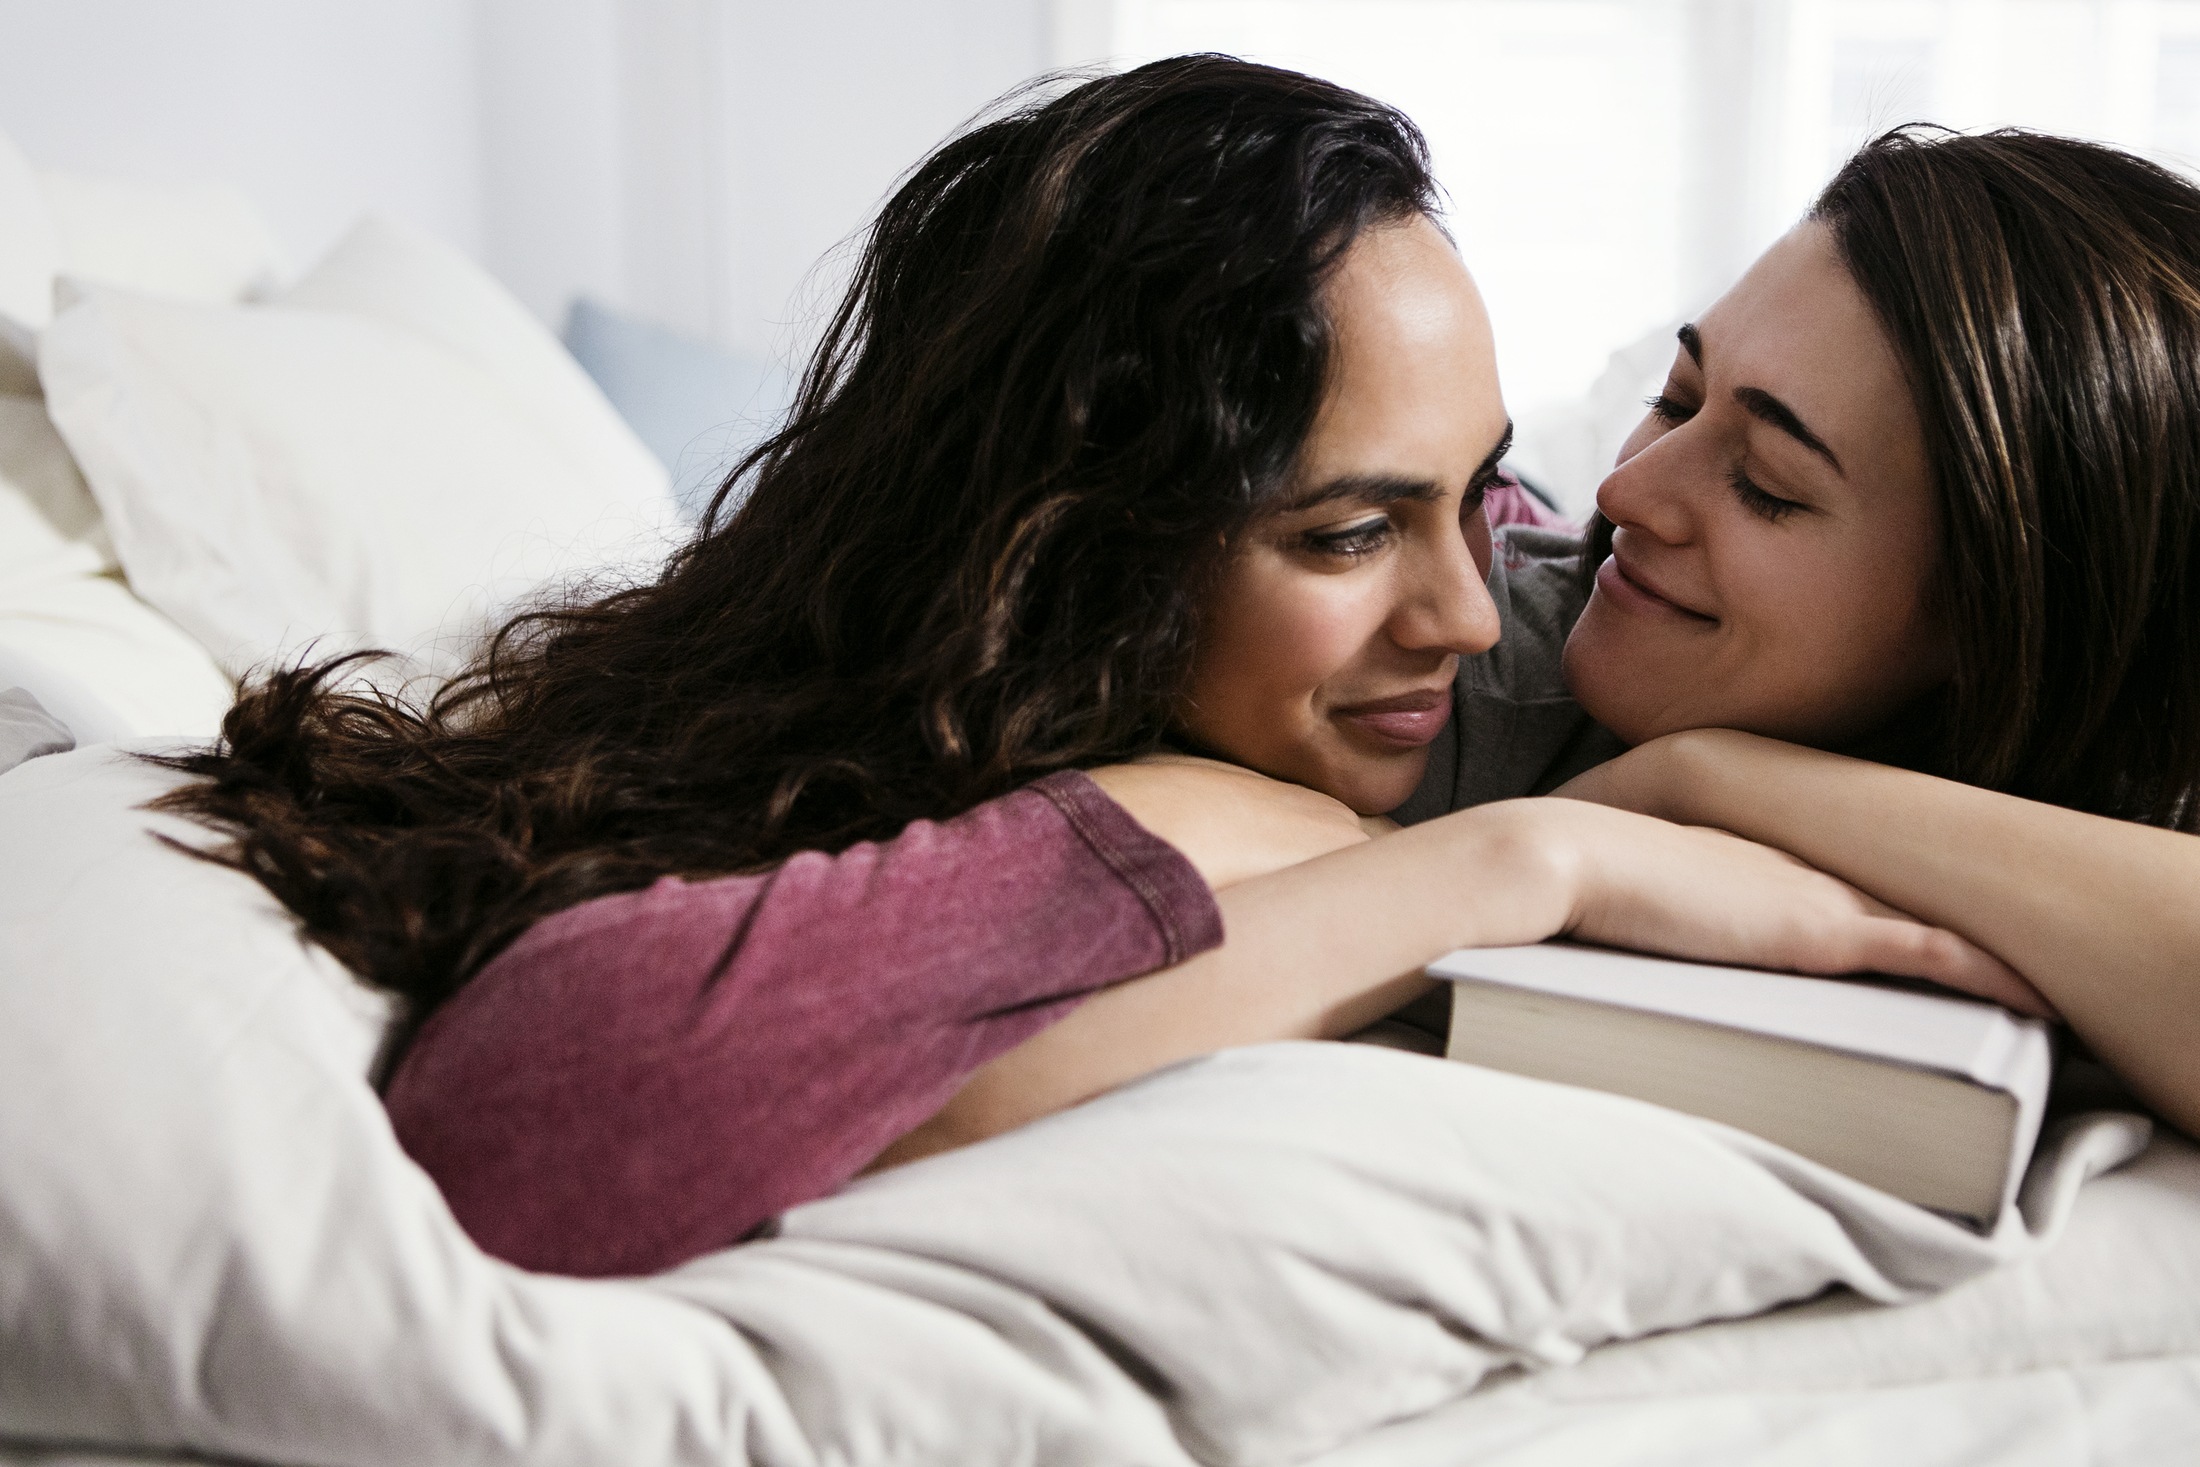 Two women lie on a bed and look into each other's eyes.